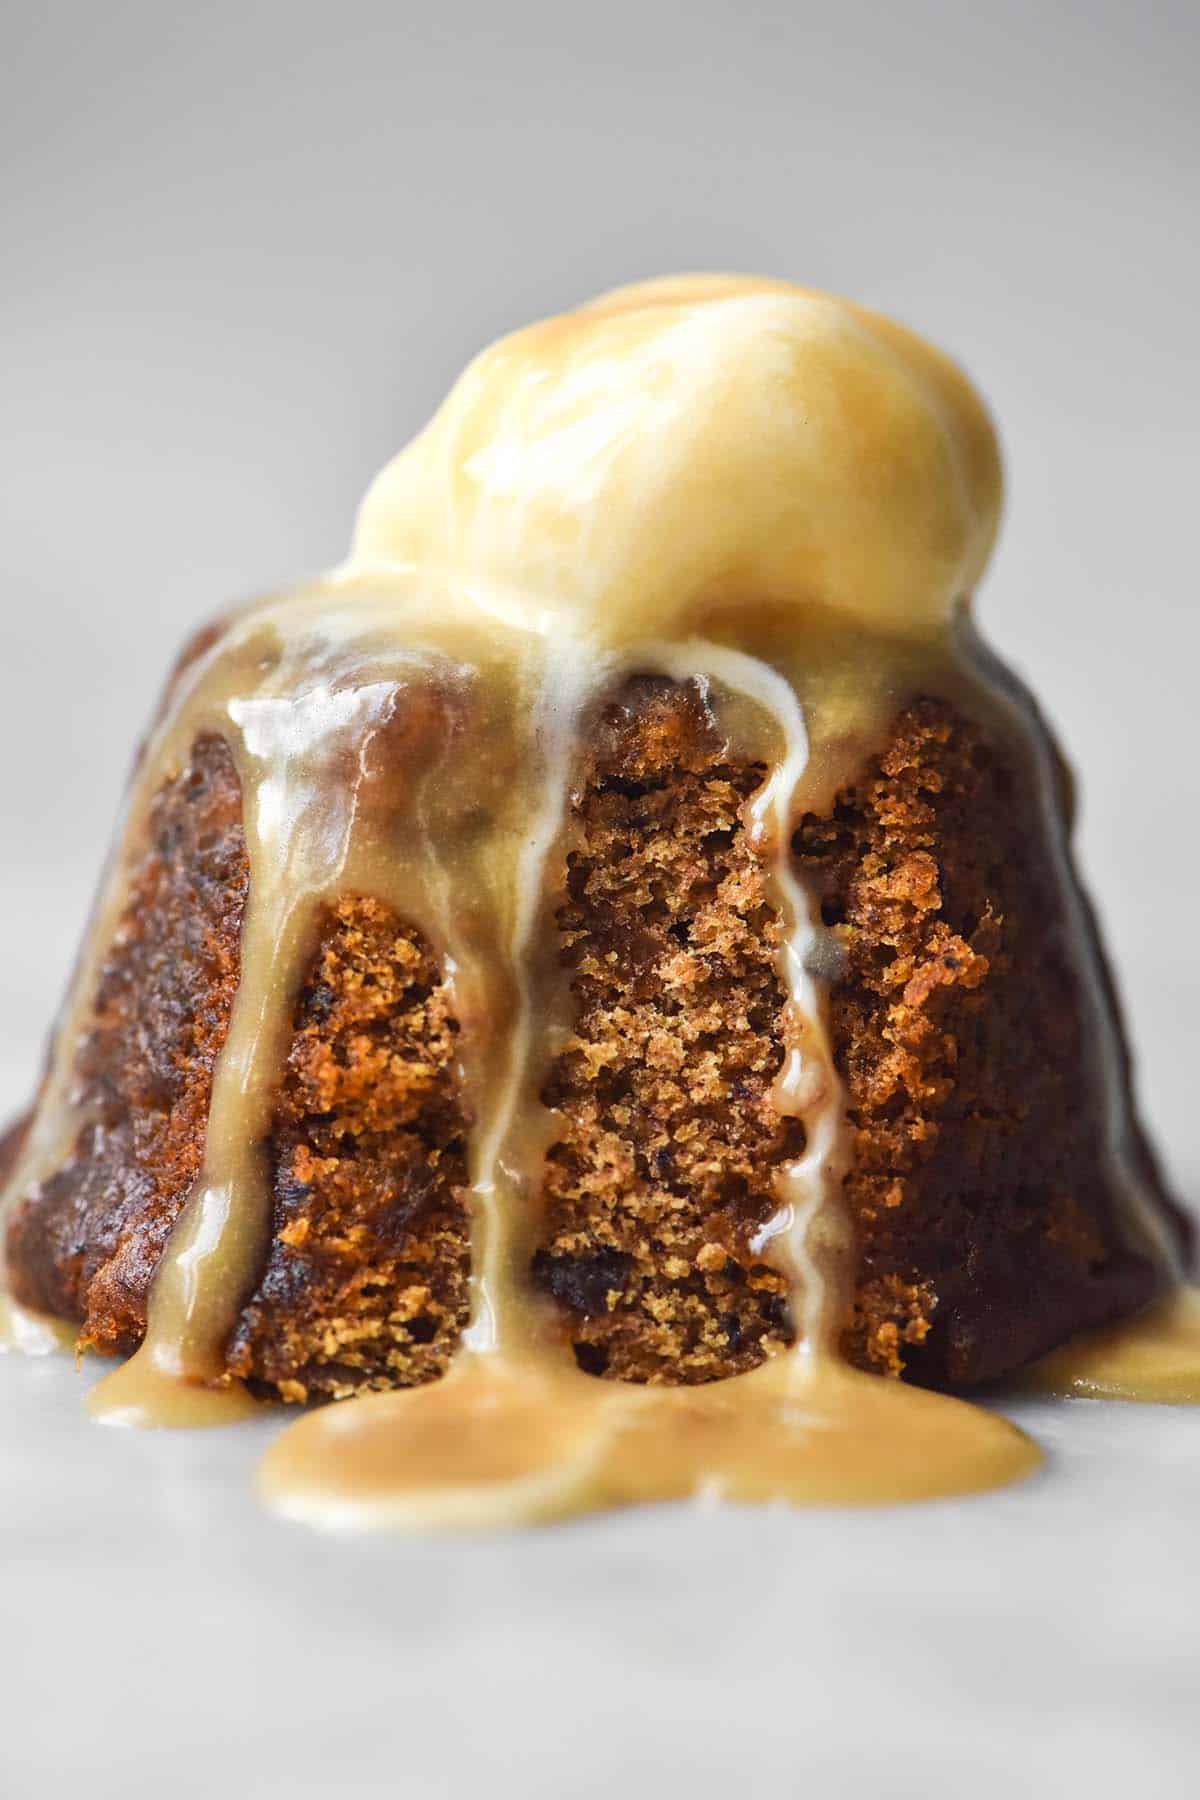 A side on image of a gluten free sticky date pudding on a white marble table. The pudding has been topped with vanilla ice cream and drizzled with butterscotch sauce.